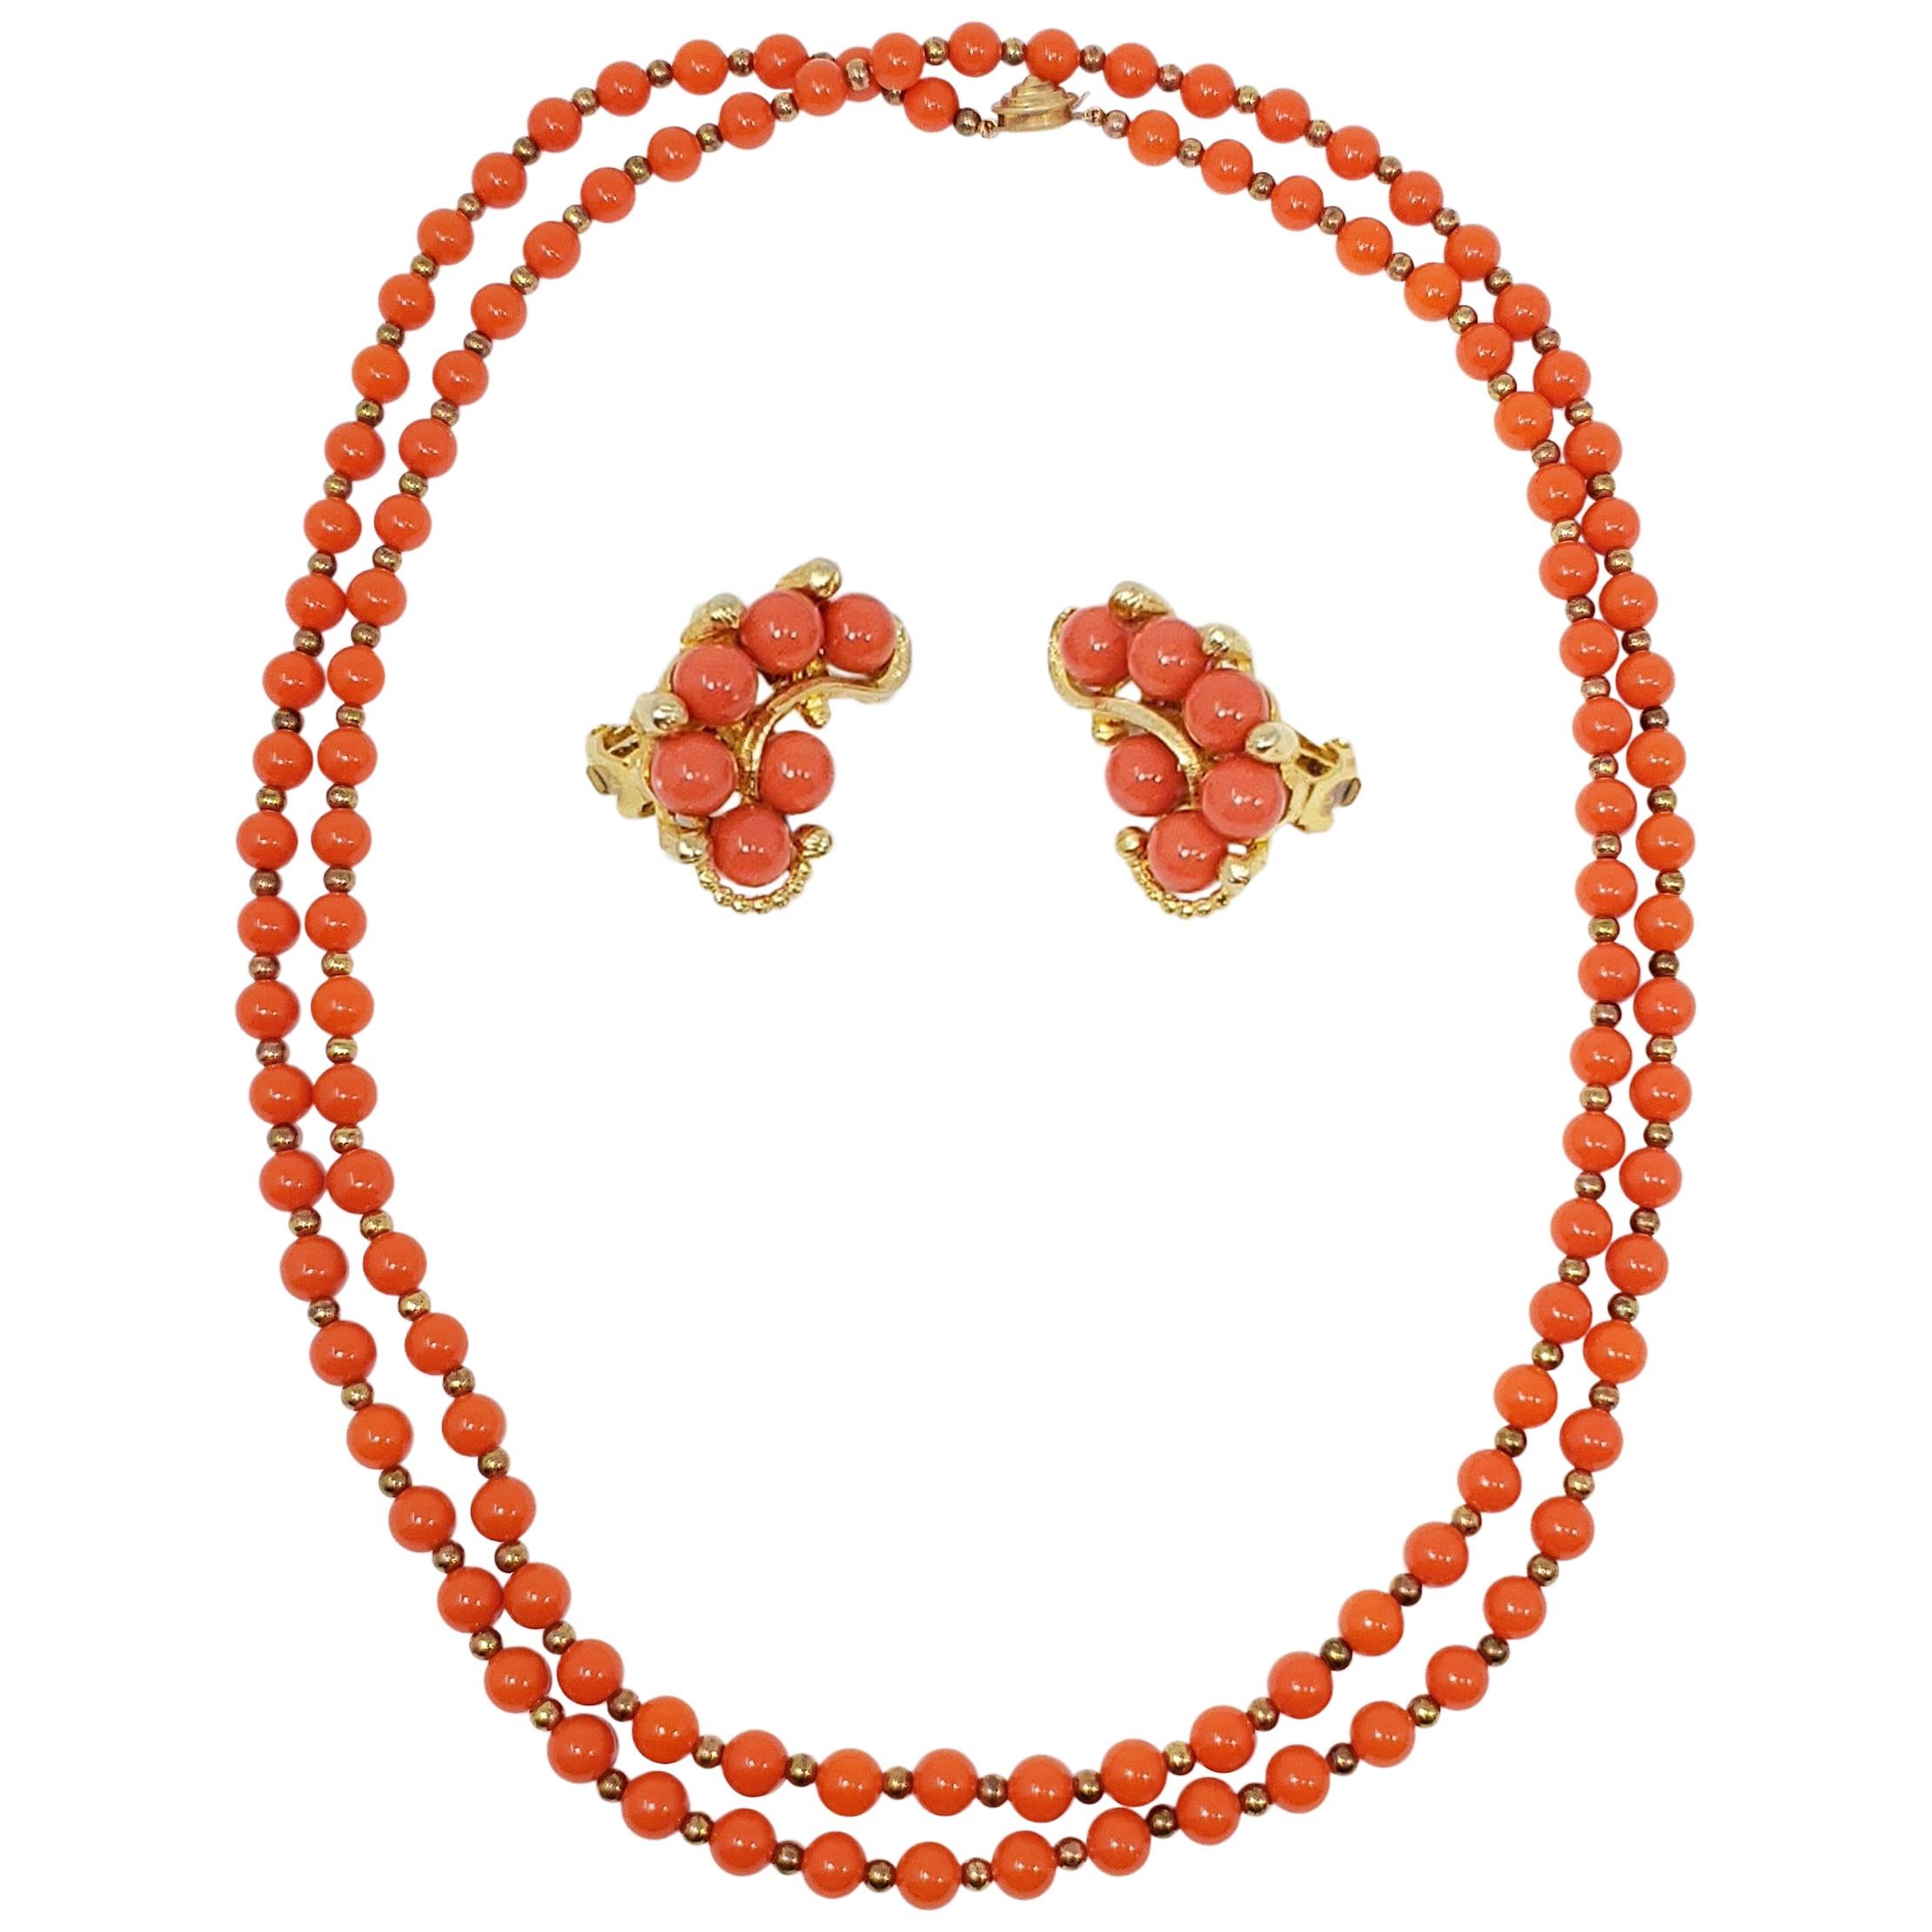 Faux Salmon Coral Bead Rope Necklace and Clip on Earrings in Gold, Mid 1900s